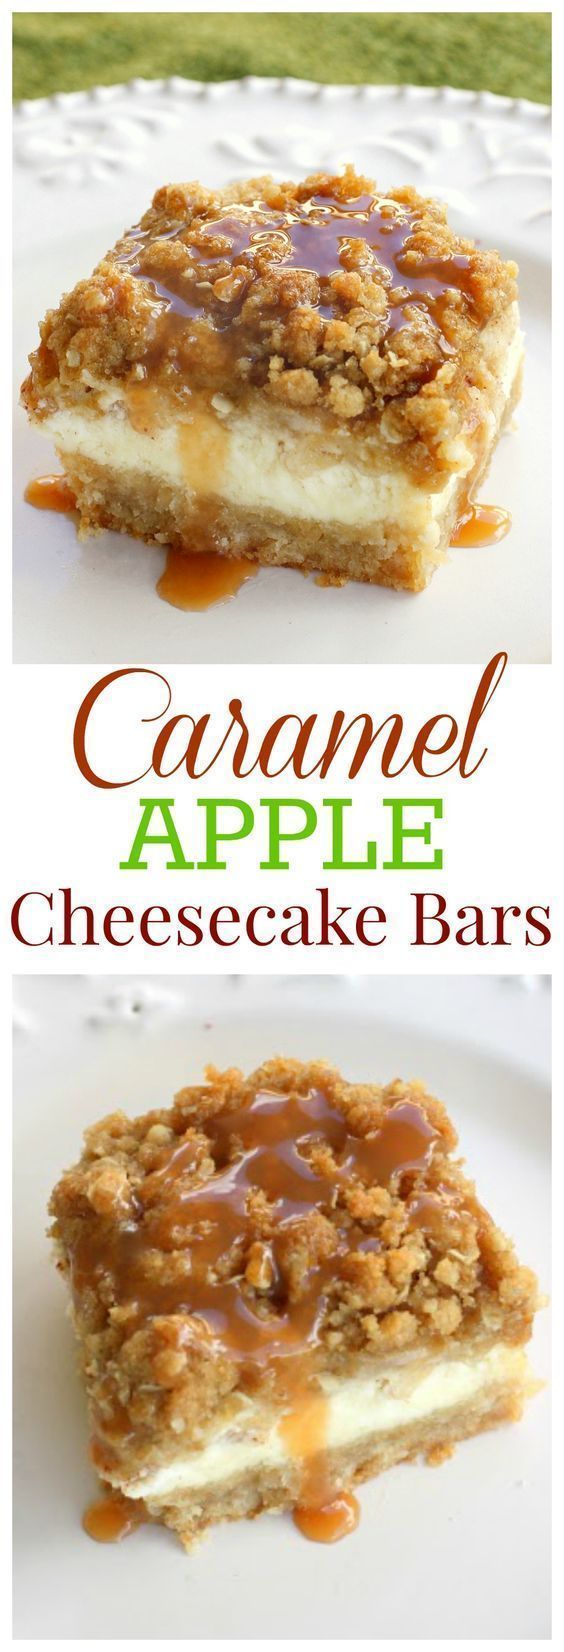 Caramel Apple Cheesecake Bars | The Girl Who Ate Everything -   18 thanksgiving desserts kids families ideas